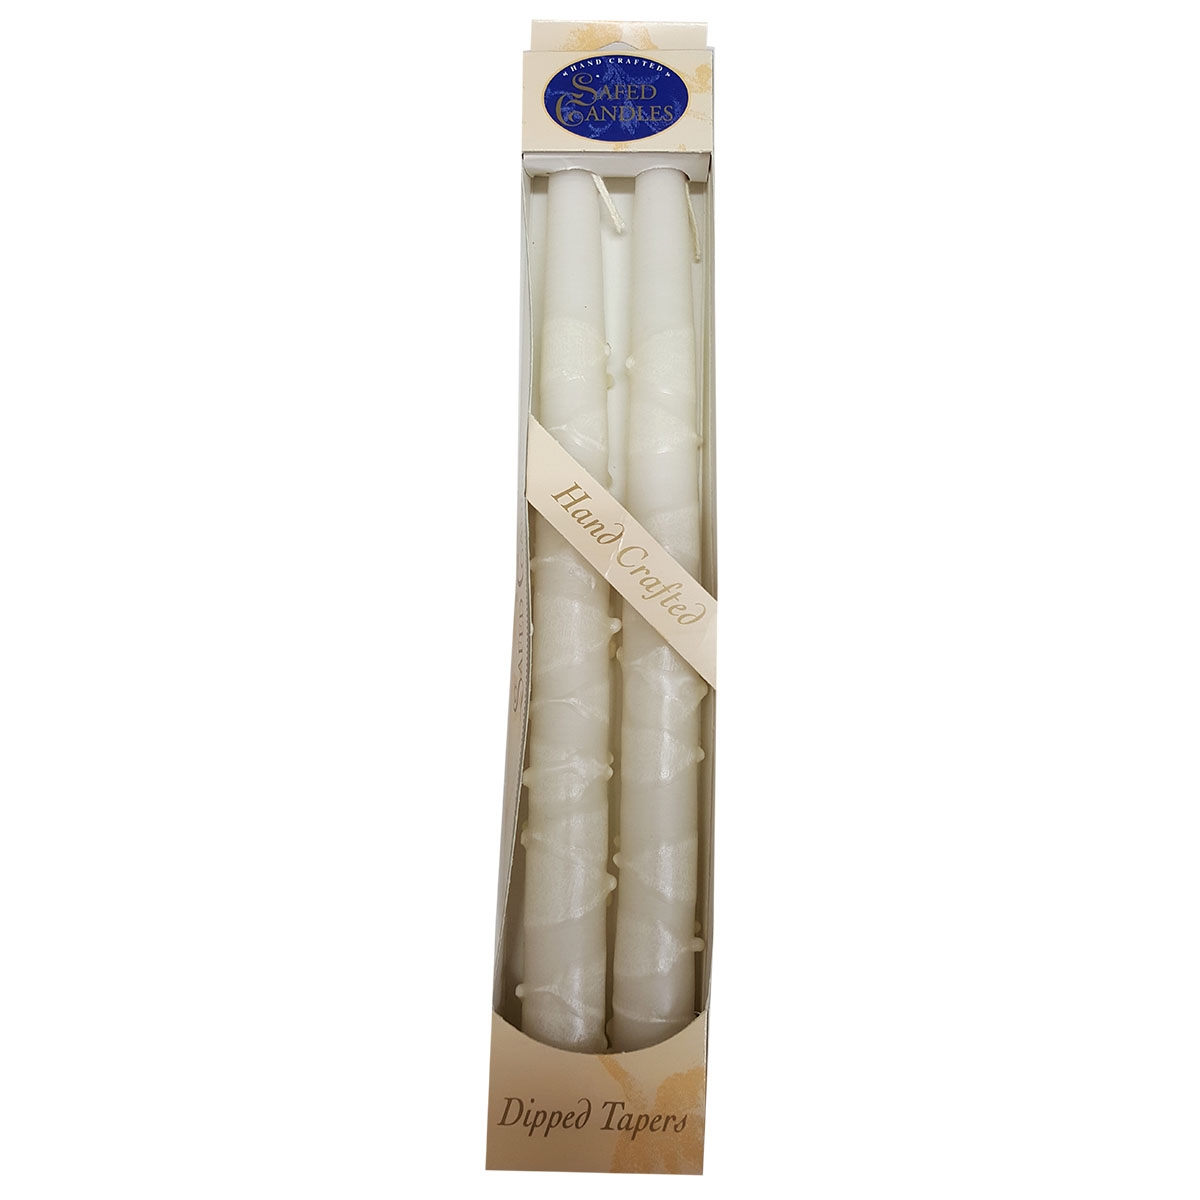 Dipped Taper Handmade Candles – White  - 1